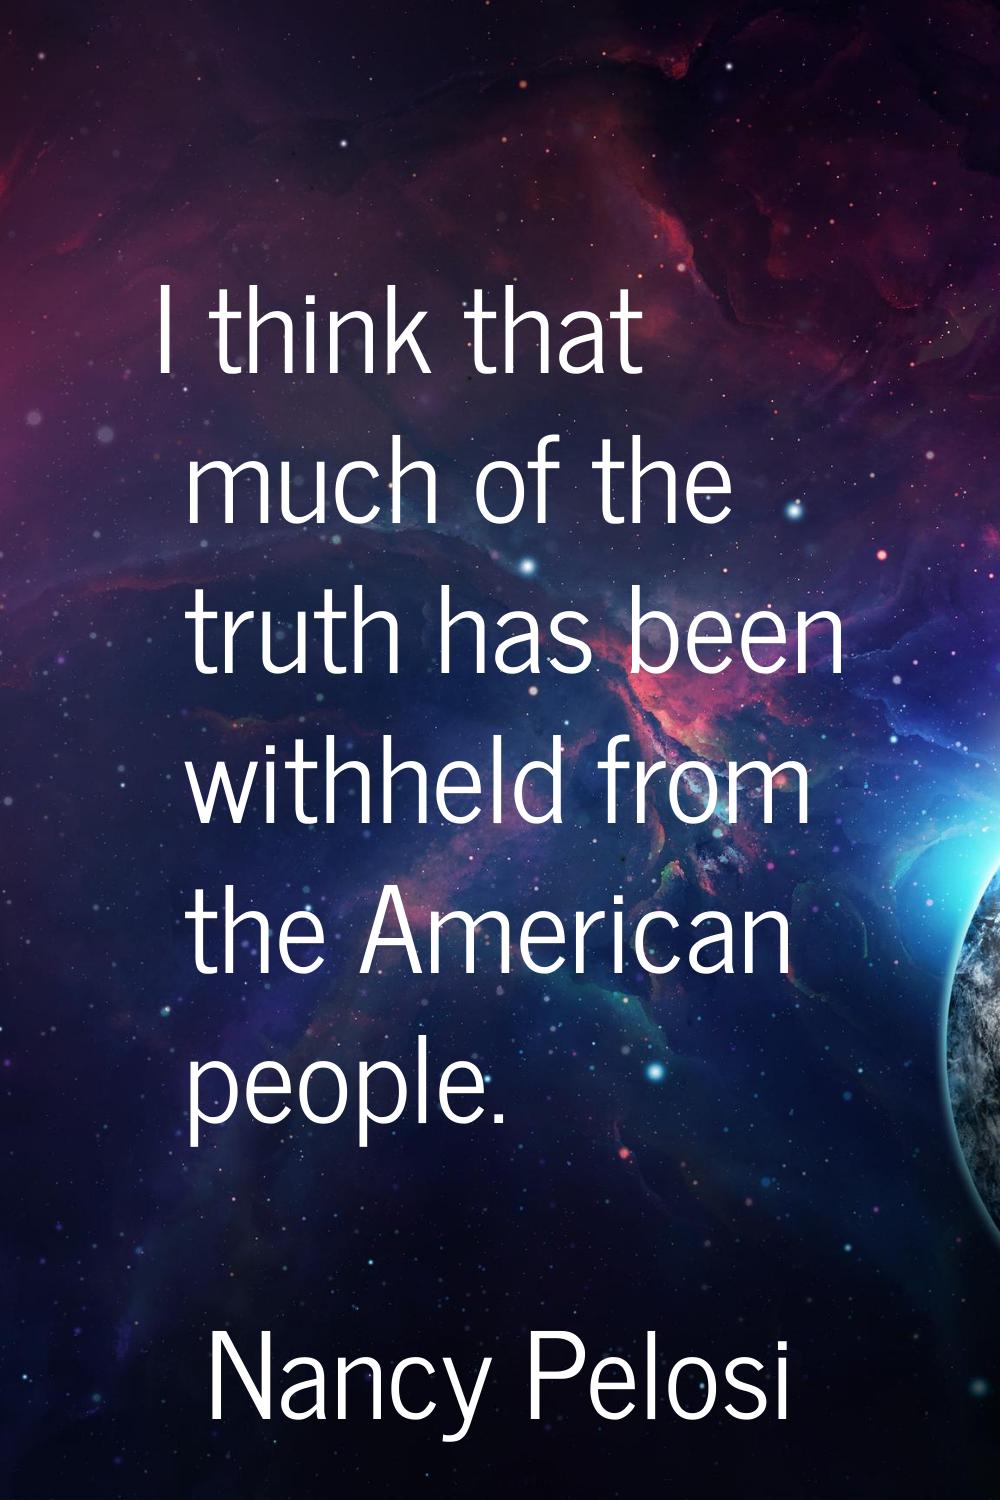 I think that much of the truth has been withheld from the American people.